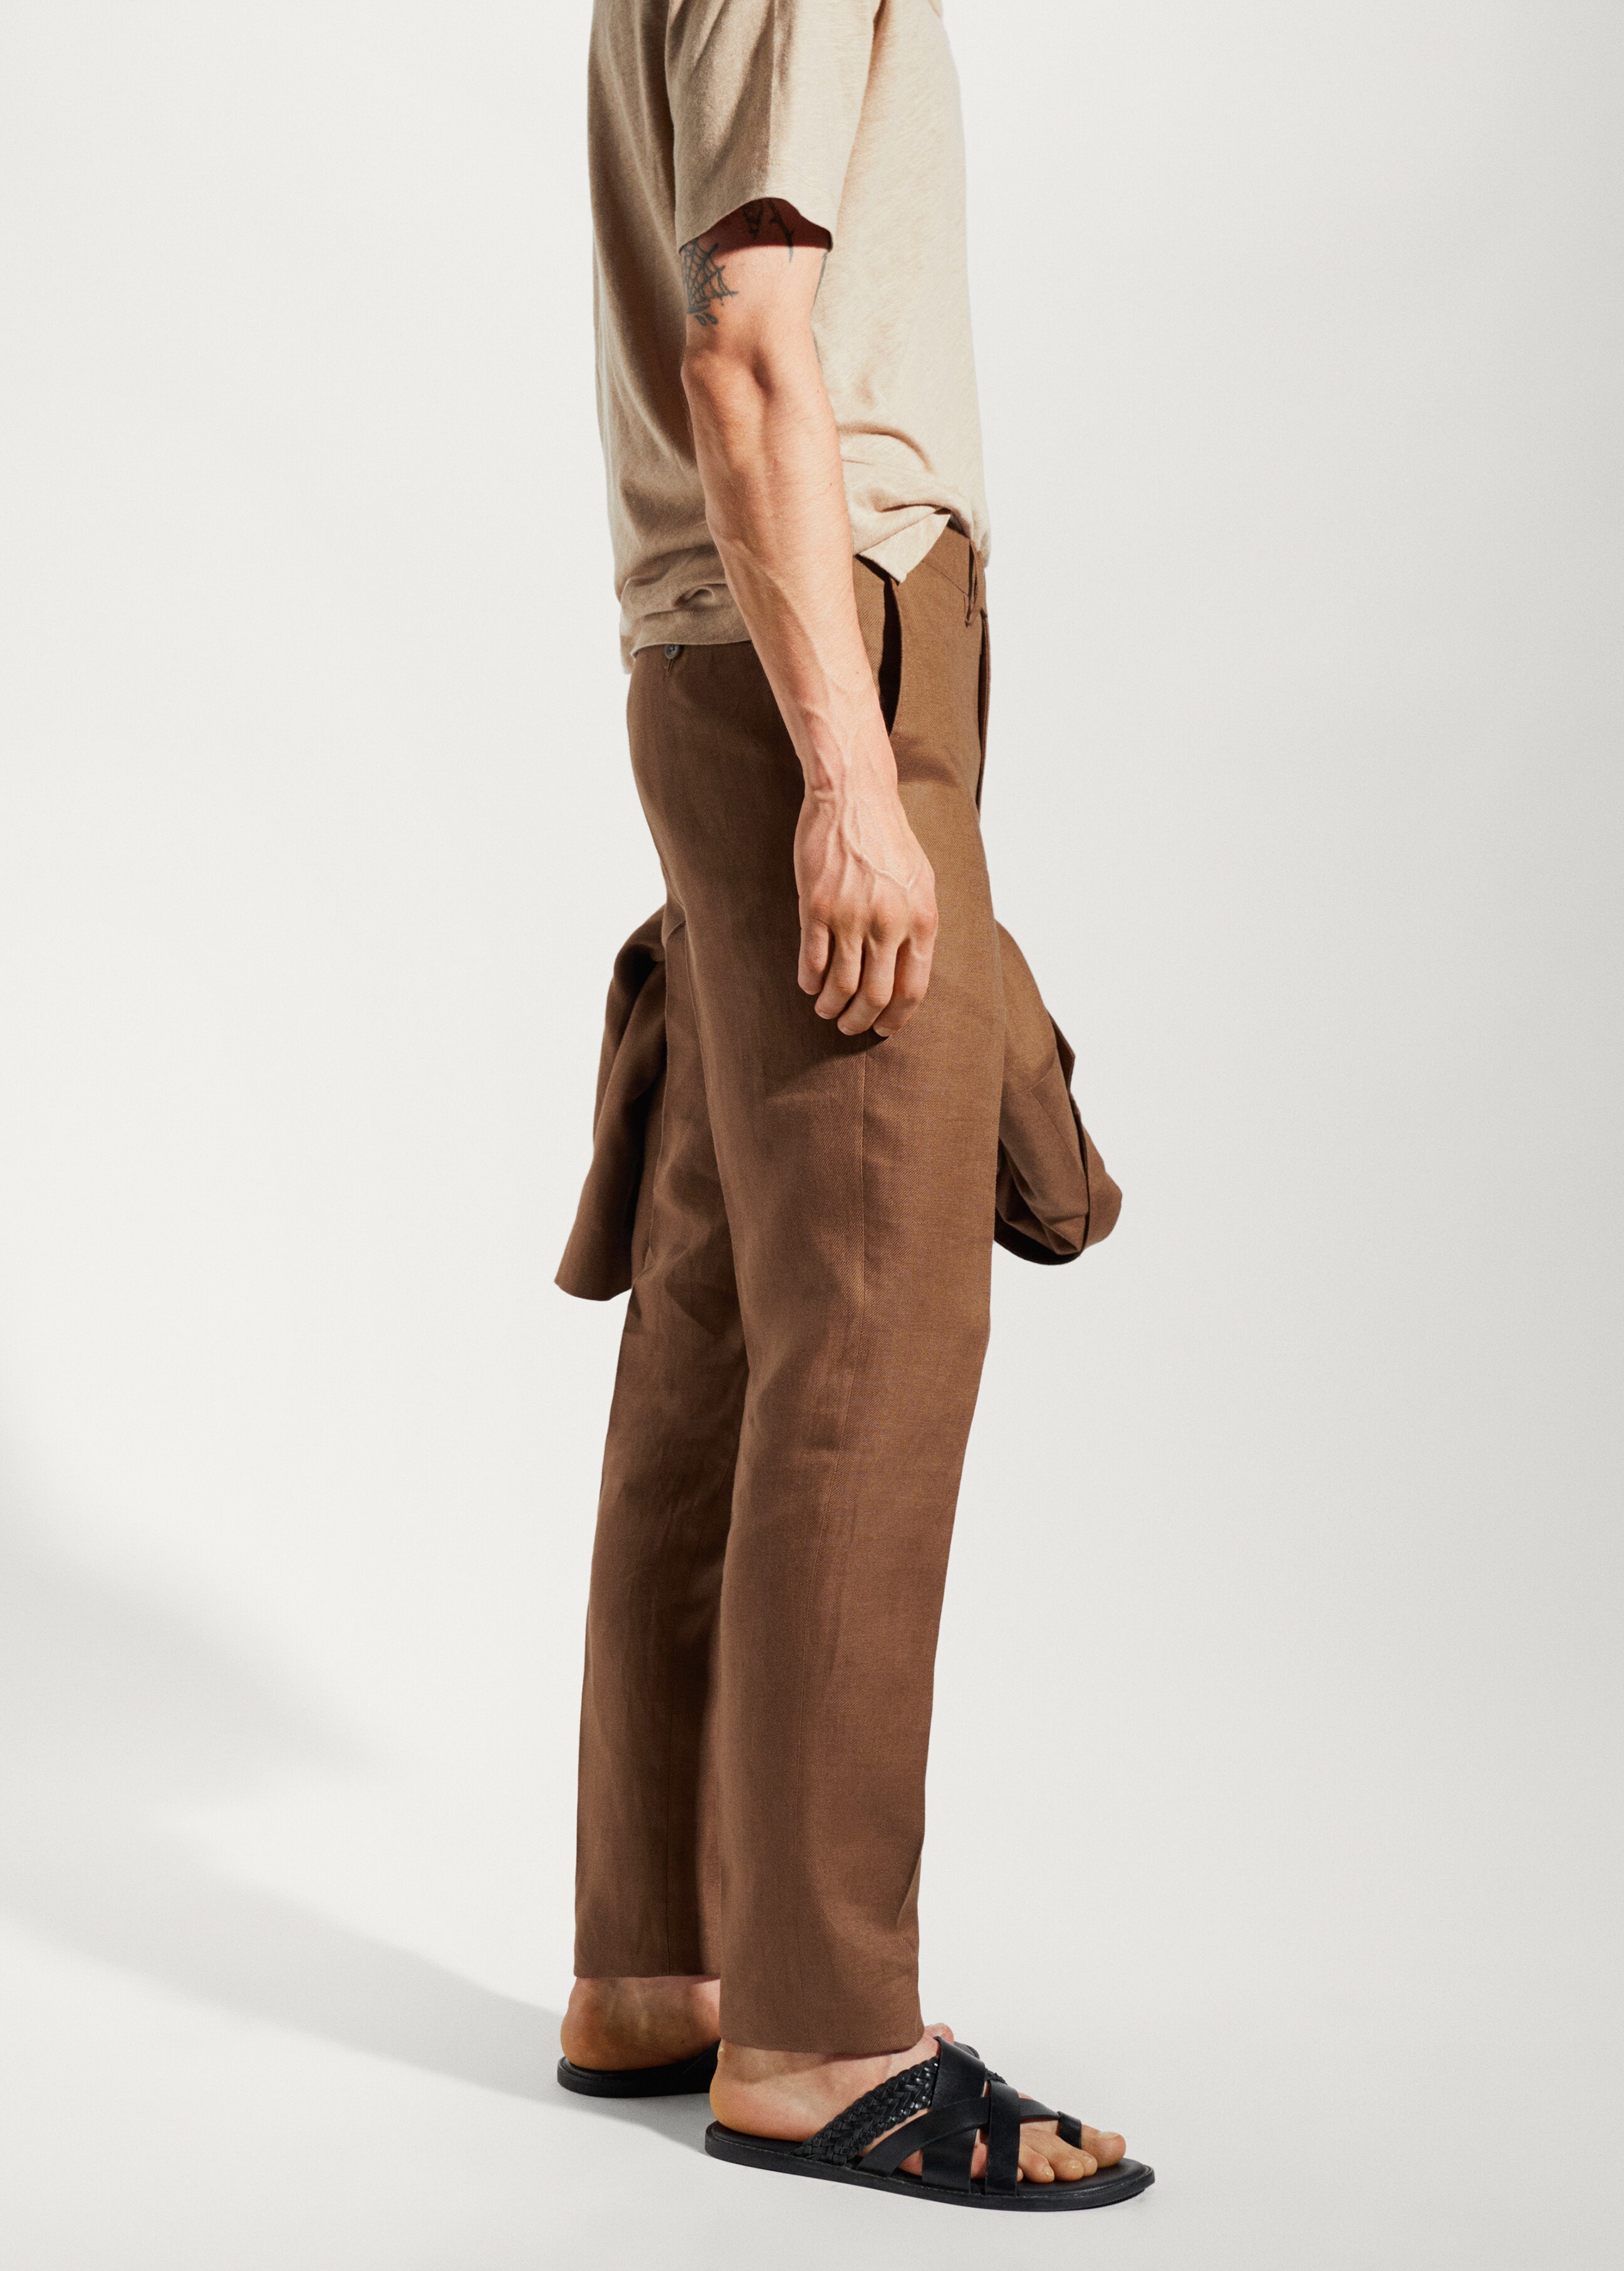 100% linen suit trousers - Details of the article 2